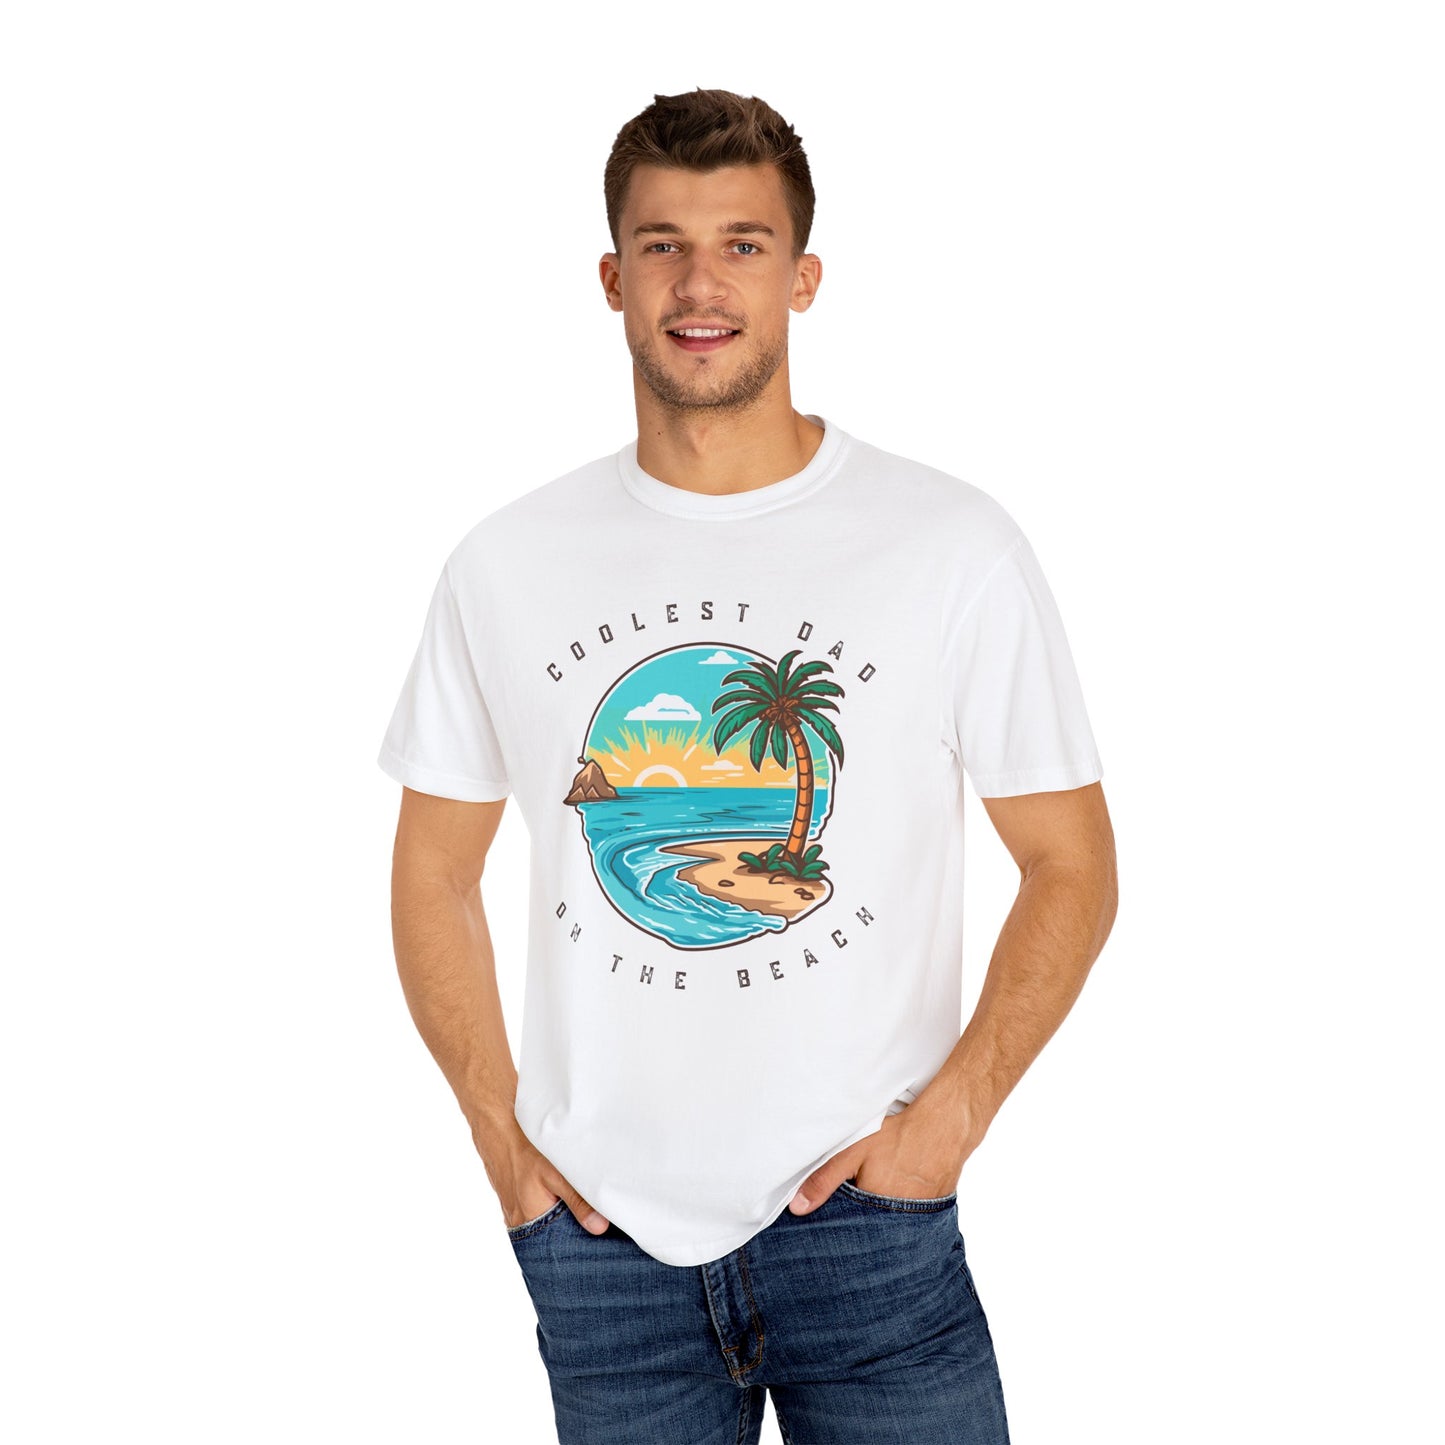 Coolest Dad on the Beach T-Shirt - Comfort Colors 1717, Ultra-Soft Ring-Spun Cotton, Relaxed Fit